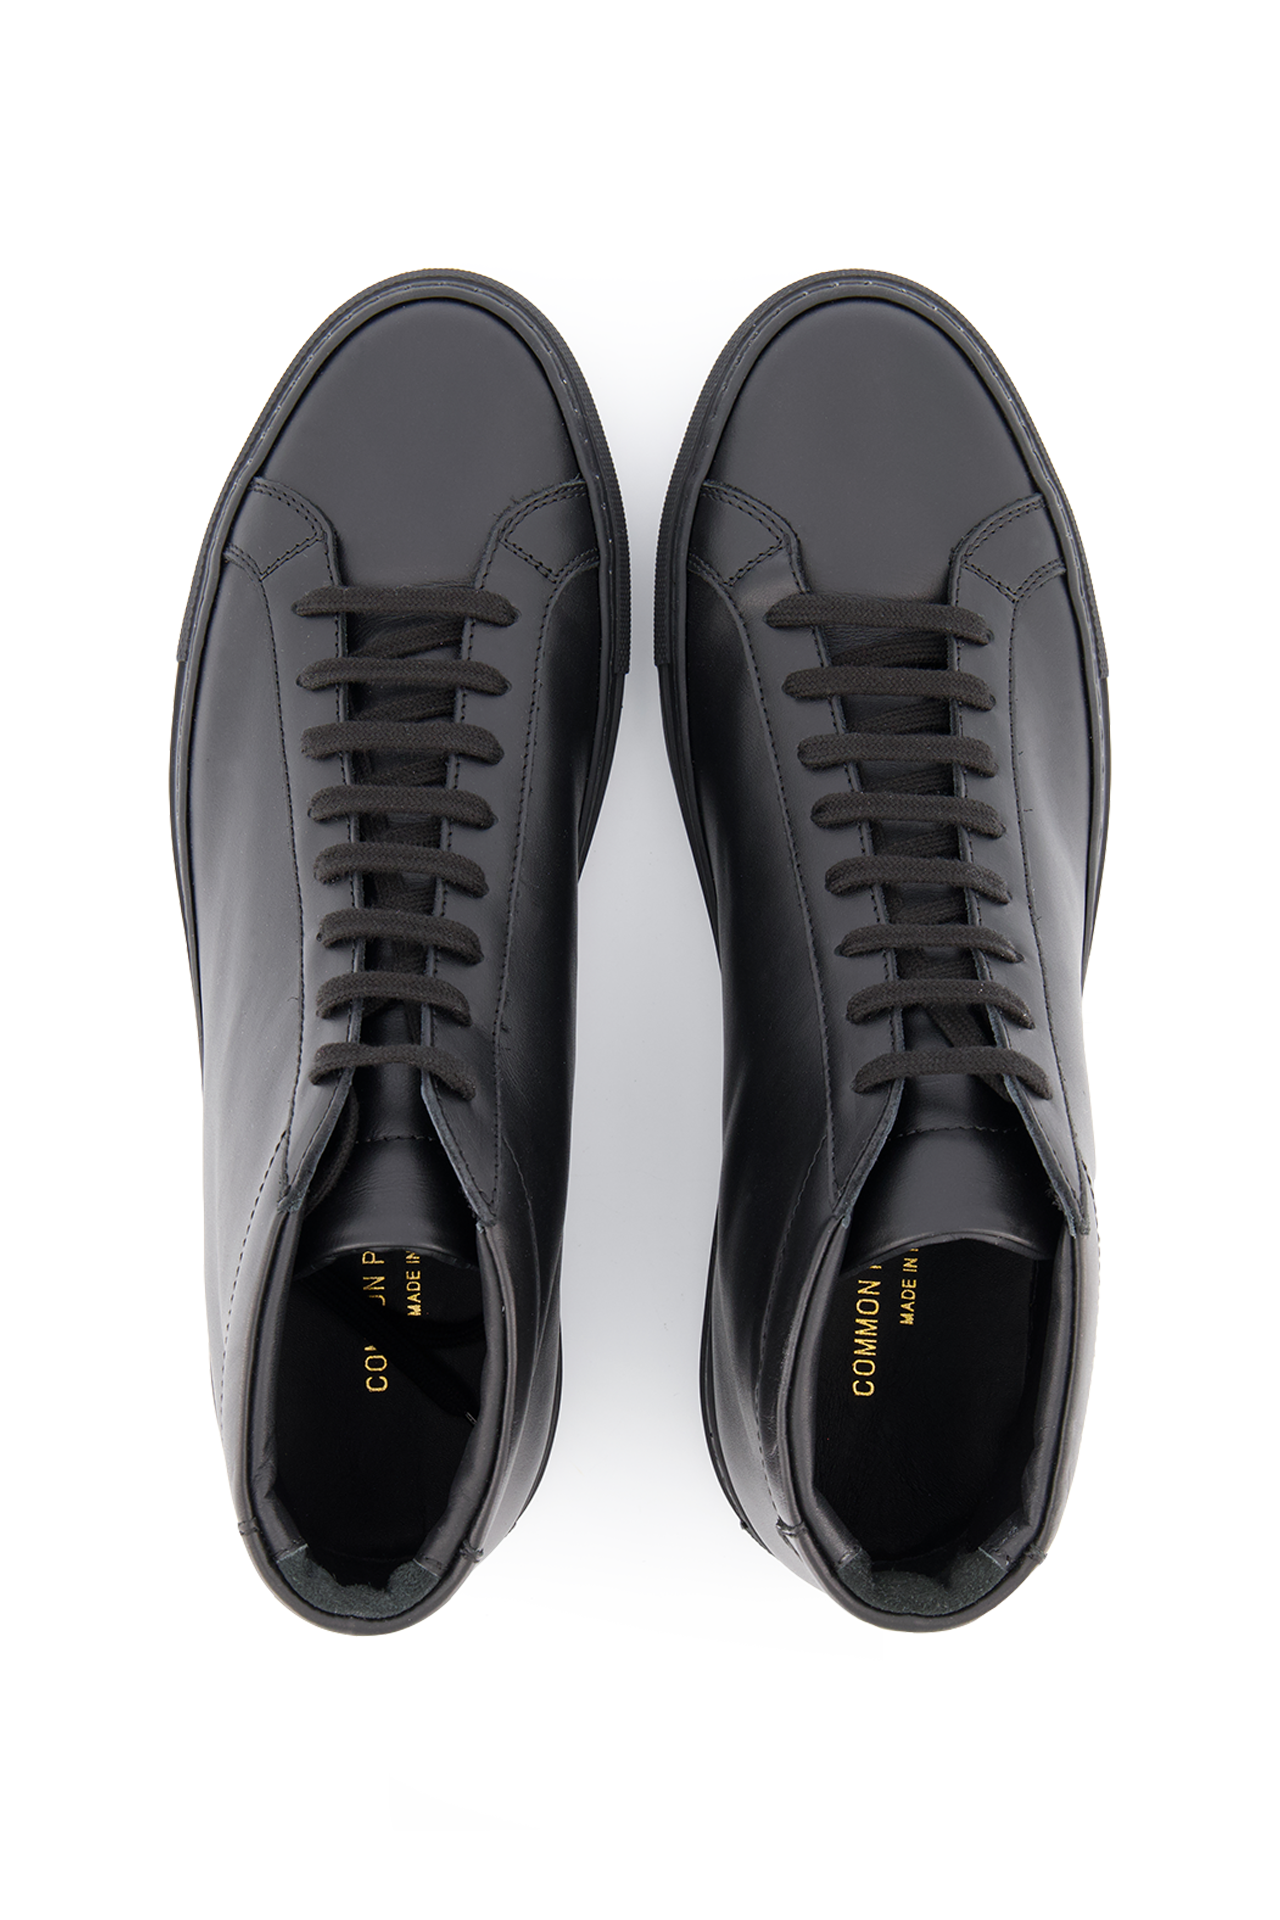 Top view image of Common Projects Achilles Mid Leather Shoe Black (601146687499)